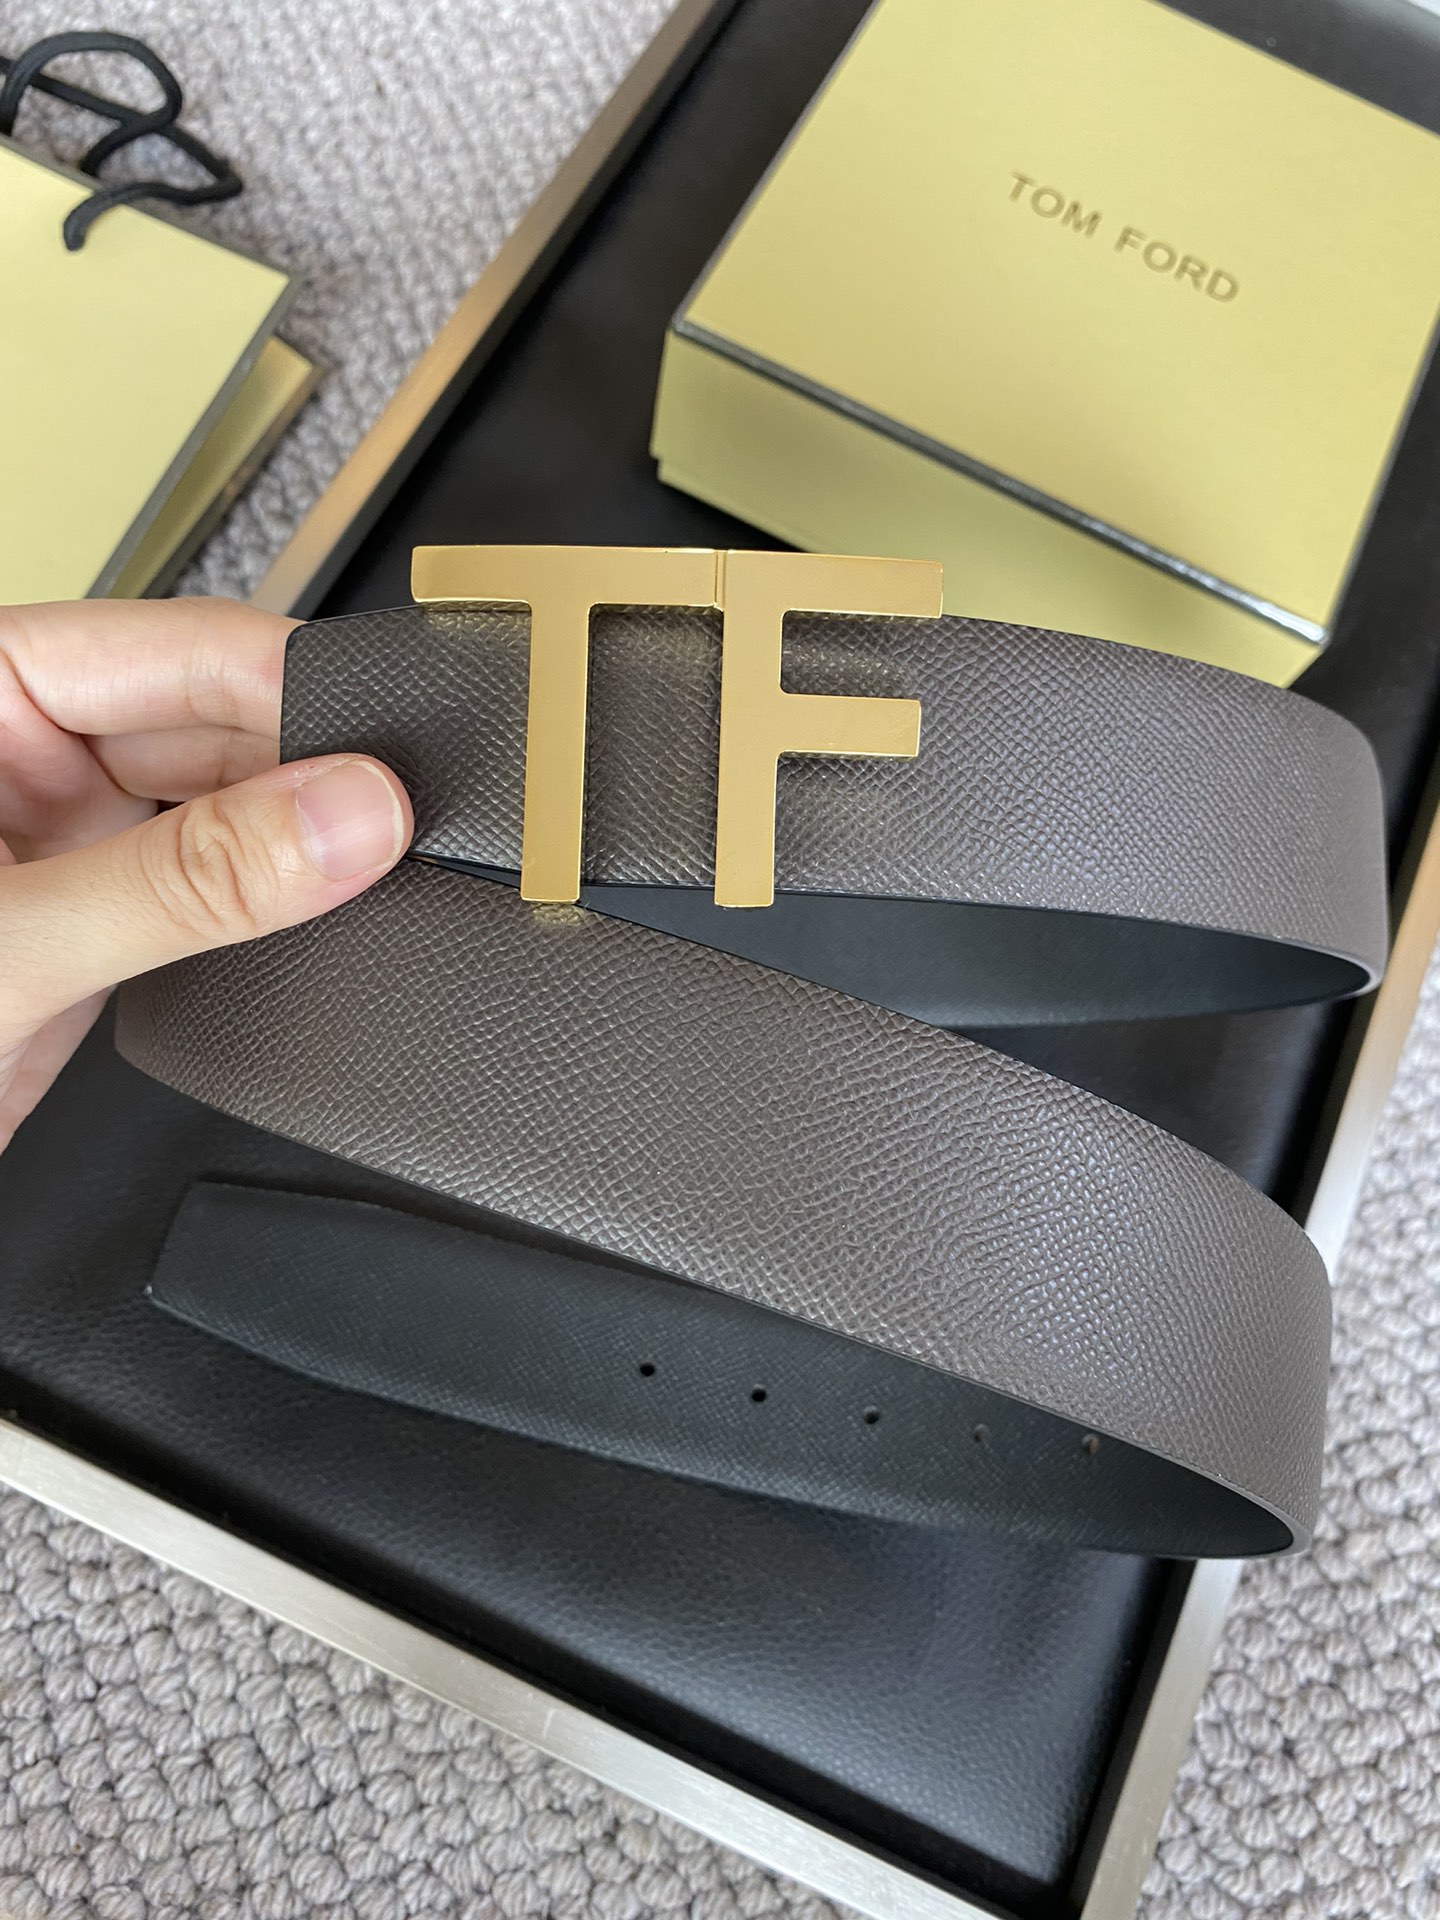 Tom Ford Belts Perfect Quality
 Men Calfskin Cowhide